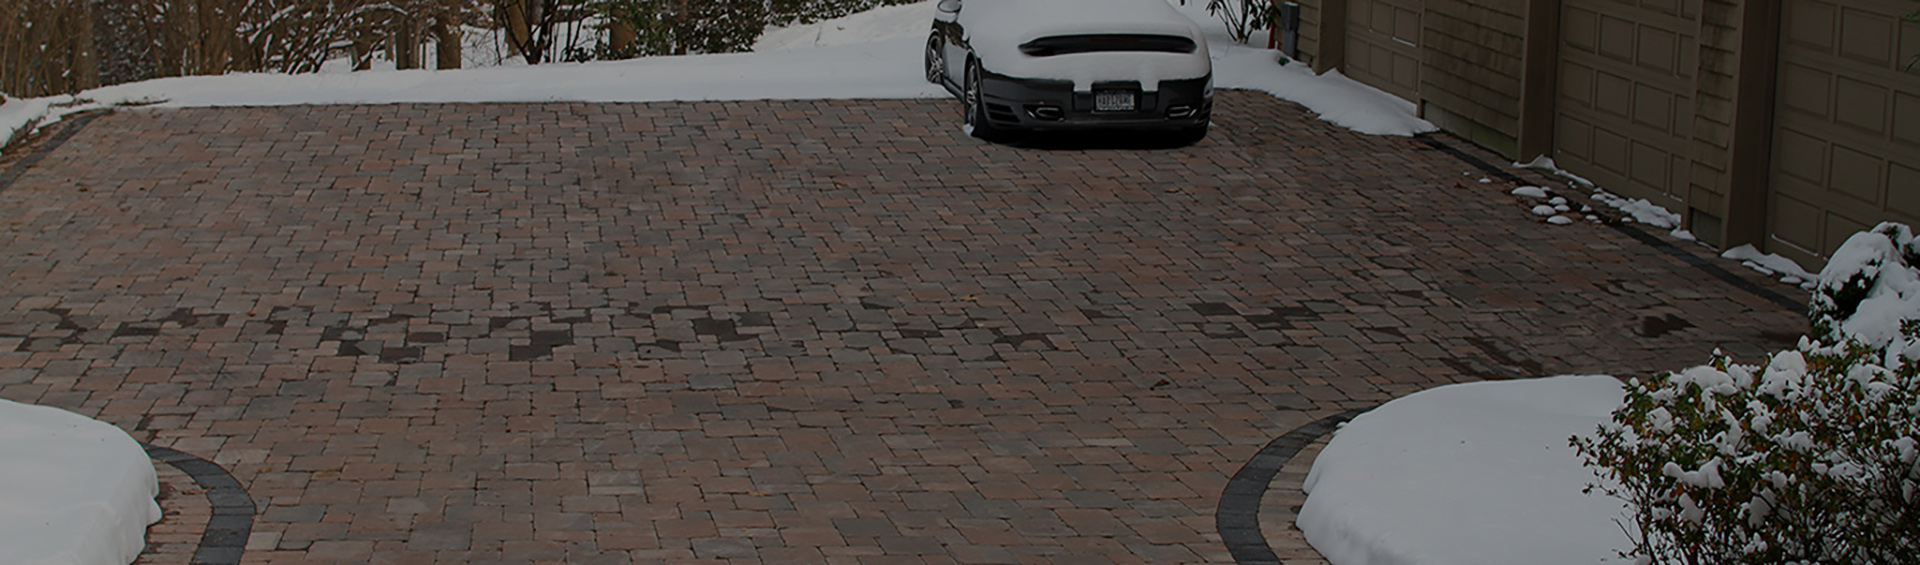 Radiant heat snow melting system installed in residential parking area banner